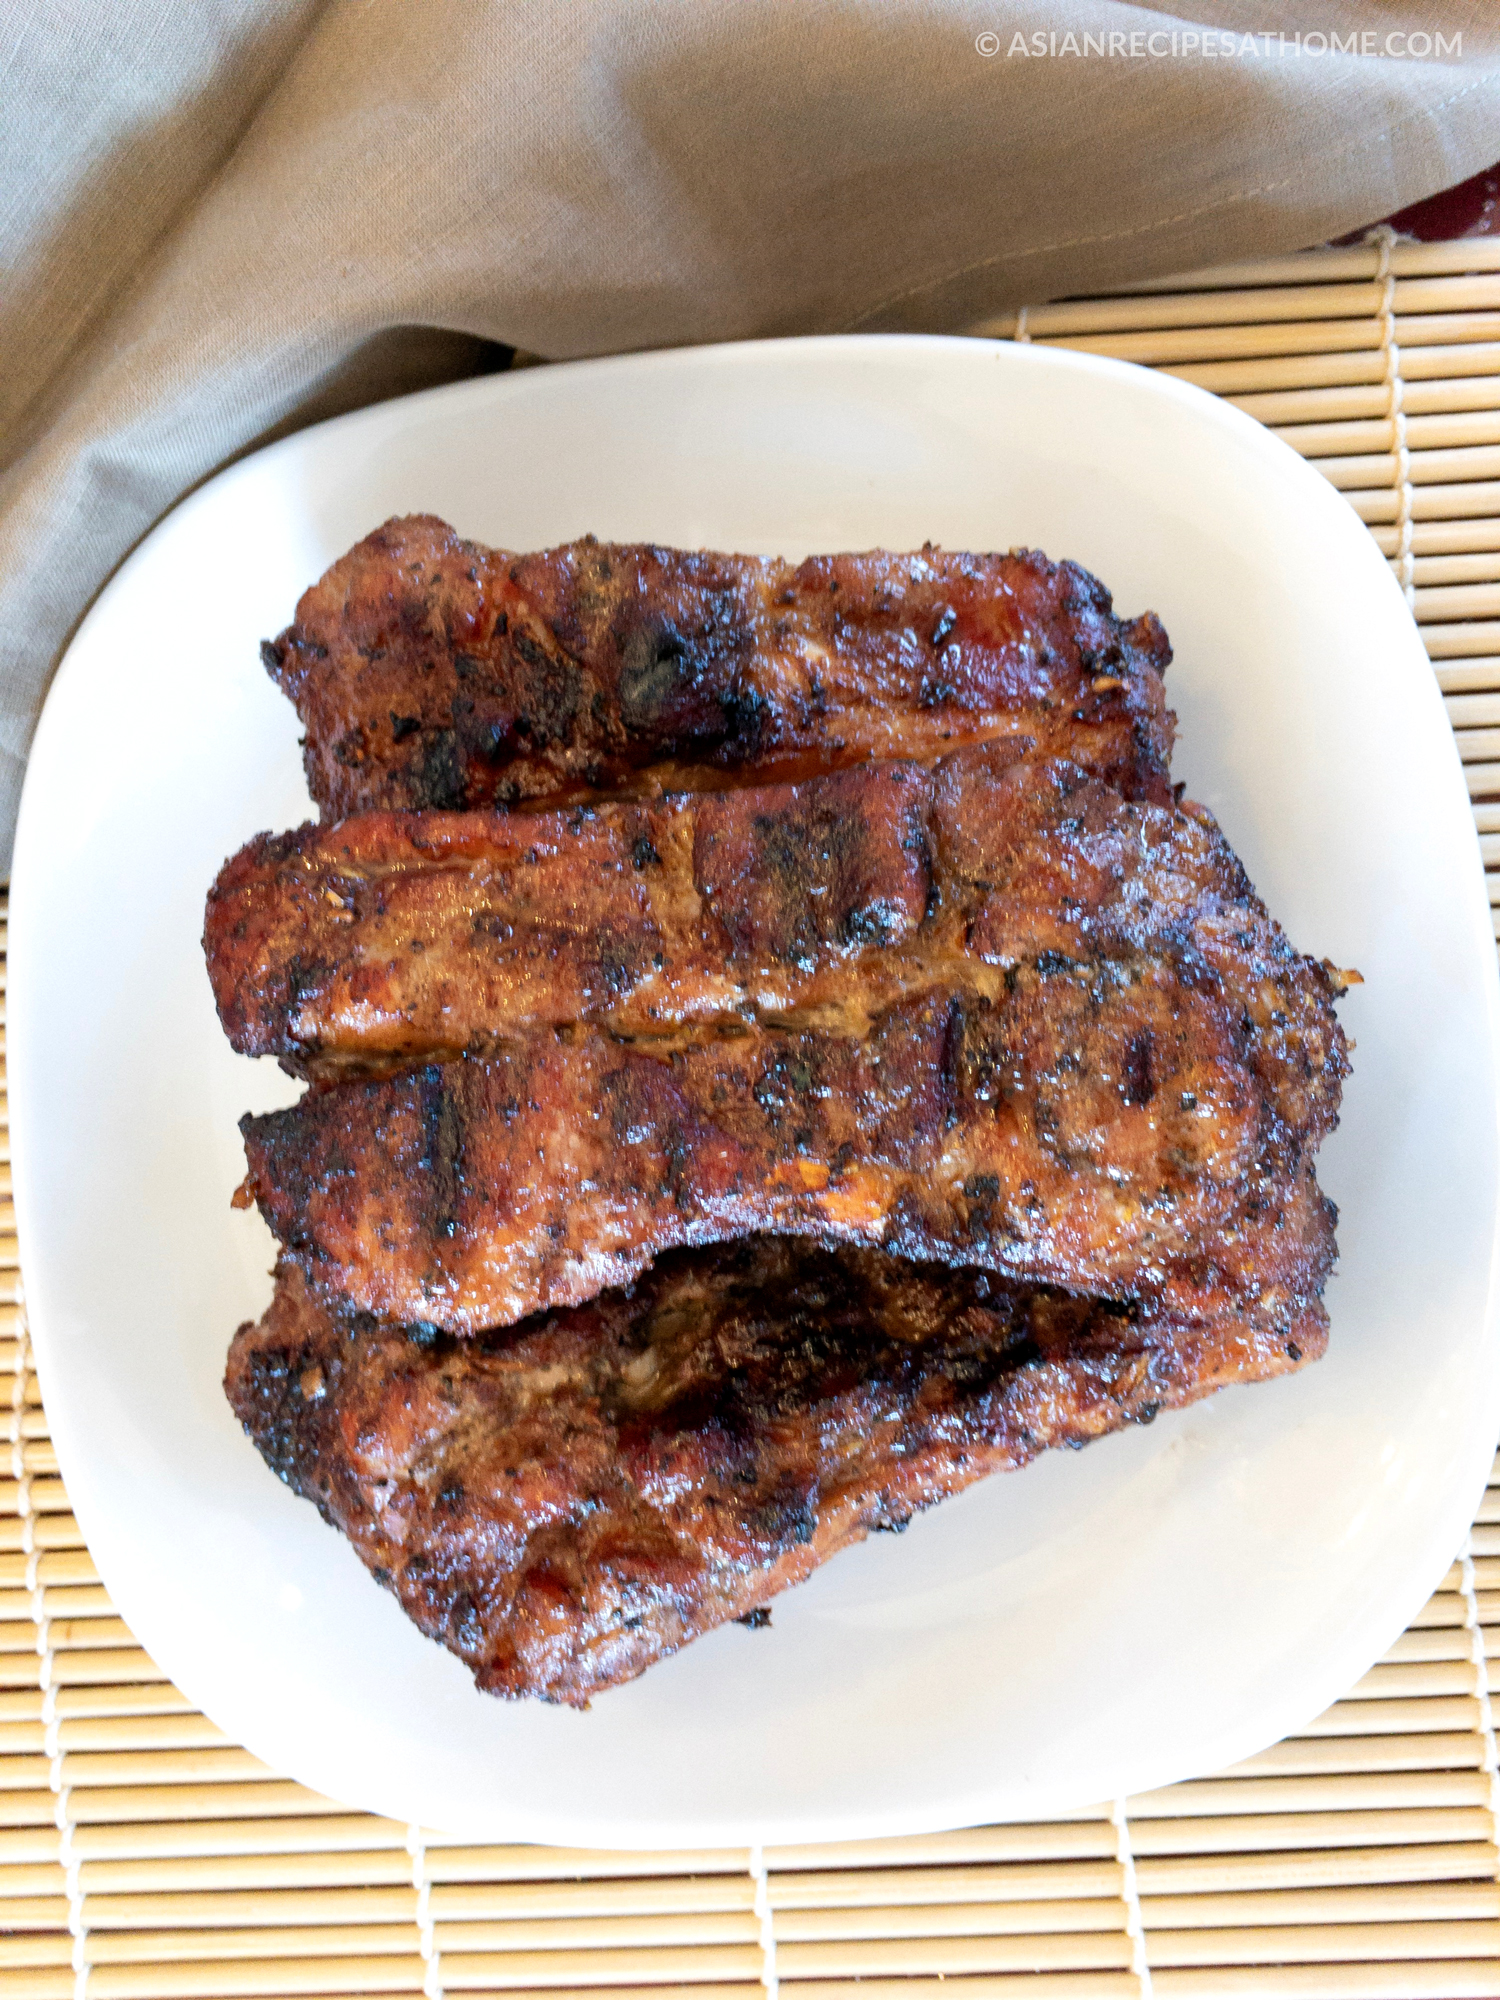 Pork ribs are marinated in a ginger, garlic, and coconut aminos marinade and then grilled to perfection.